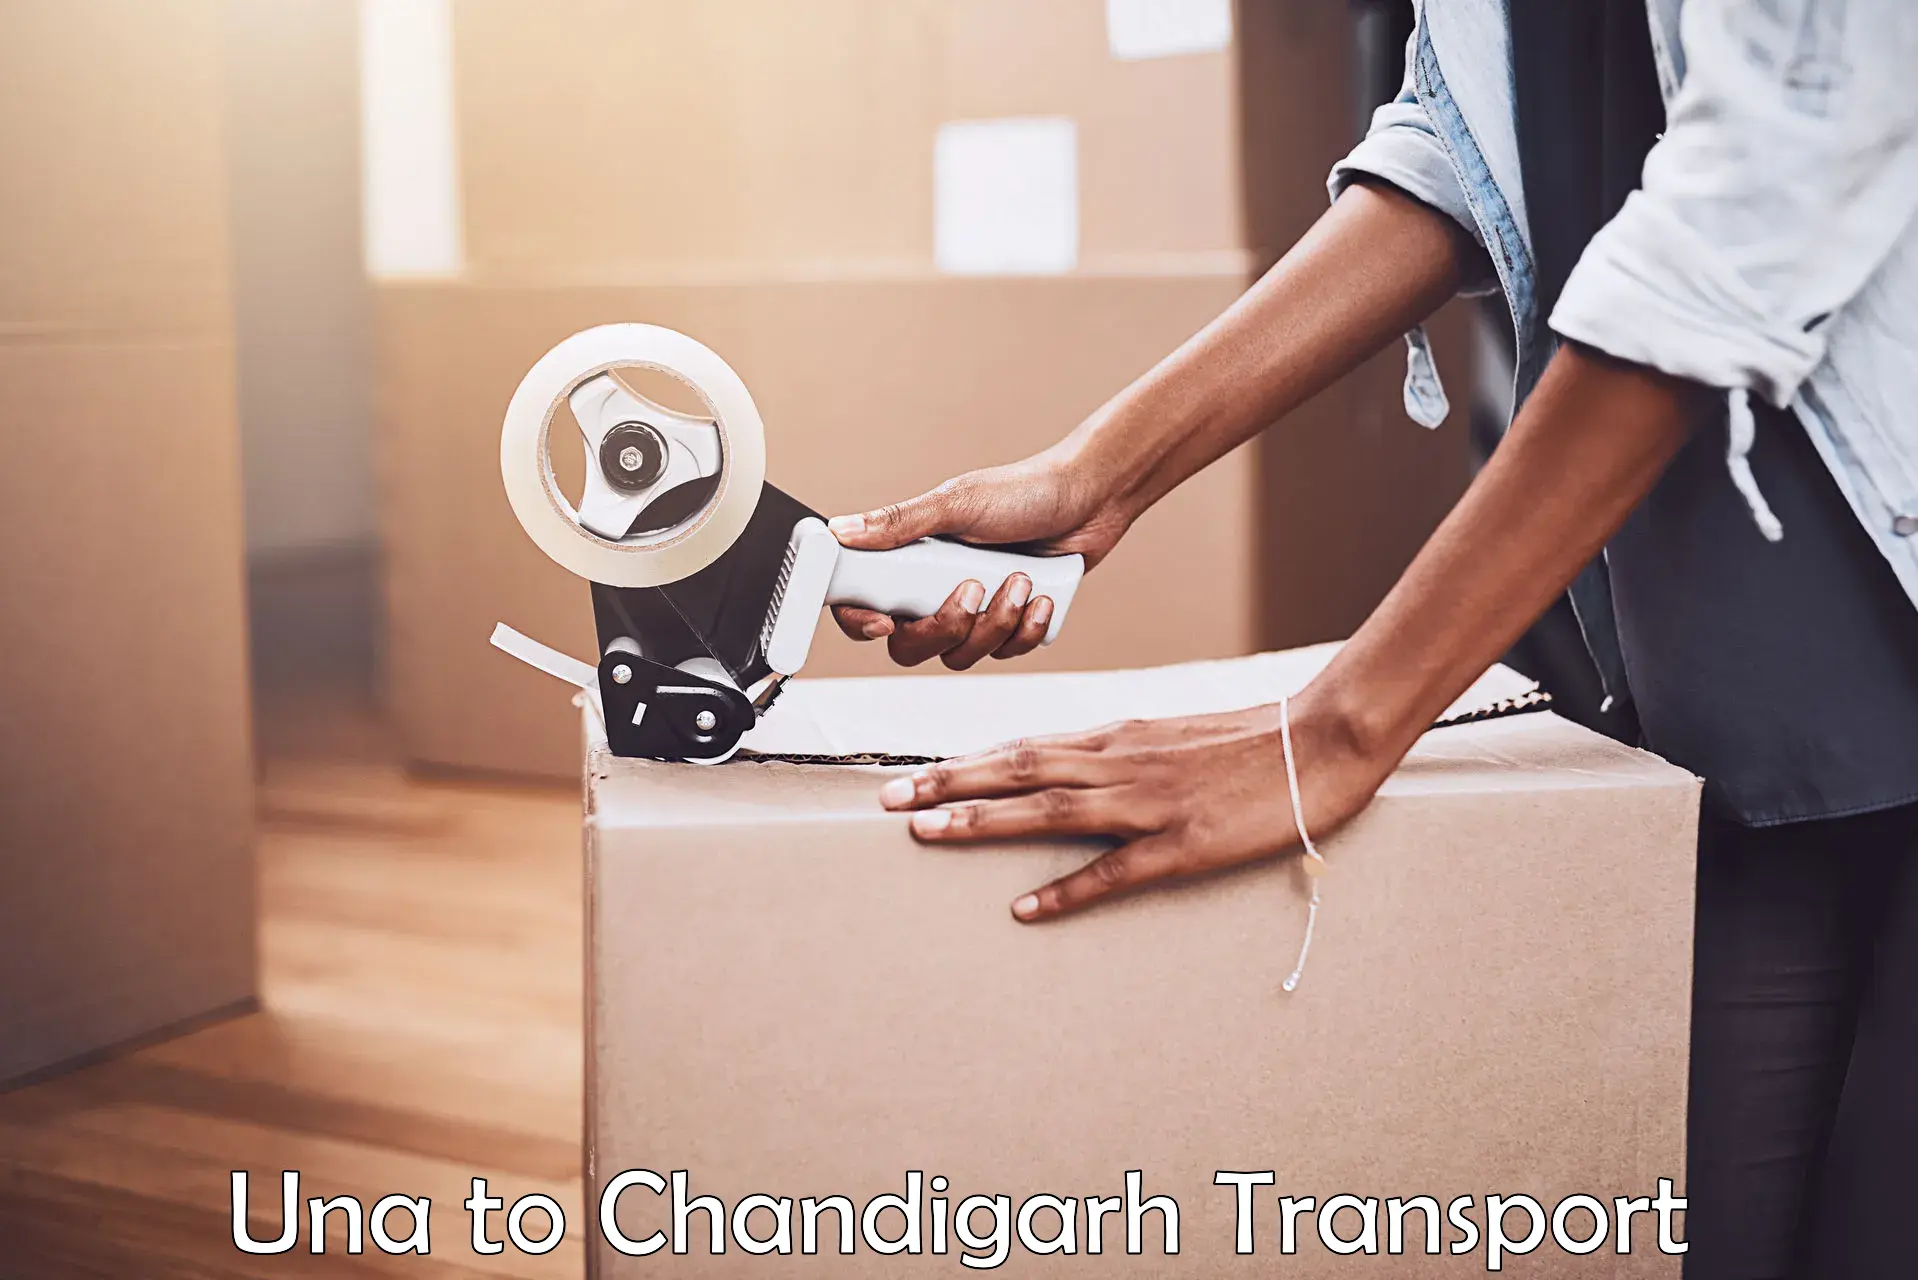 Two wheeler transport services Una to Chandigarh